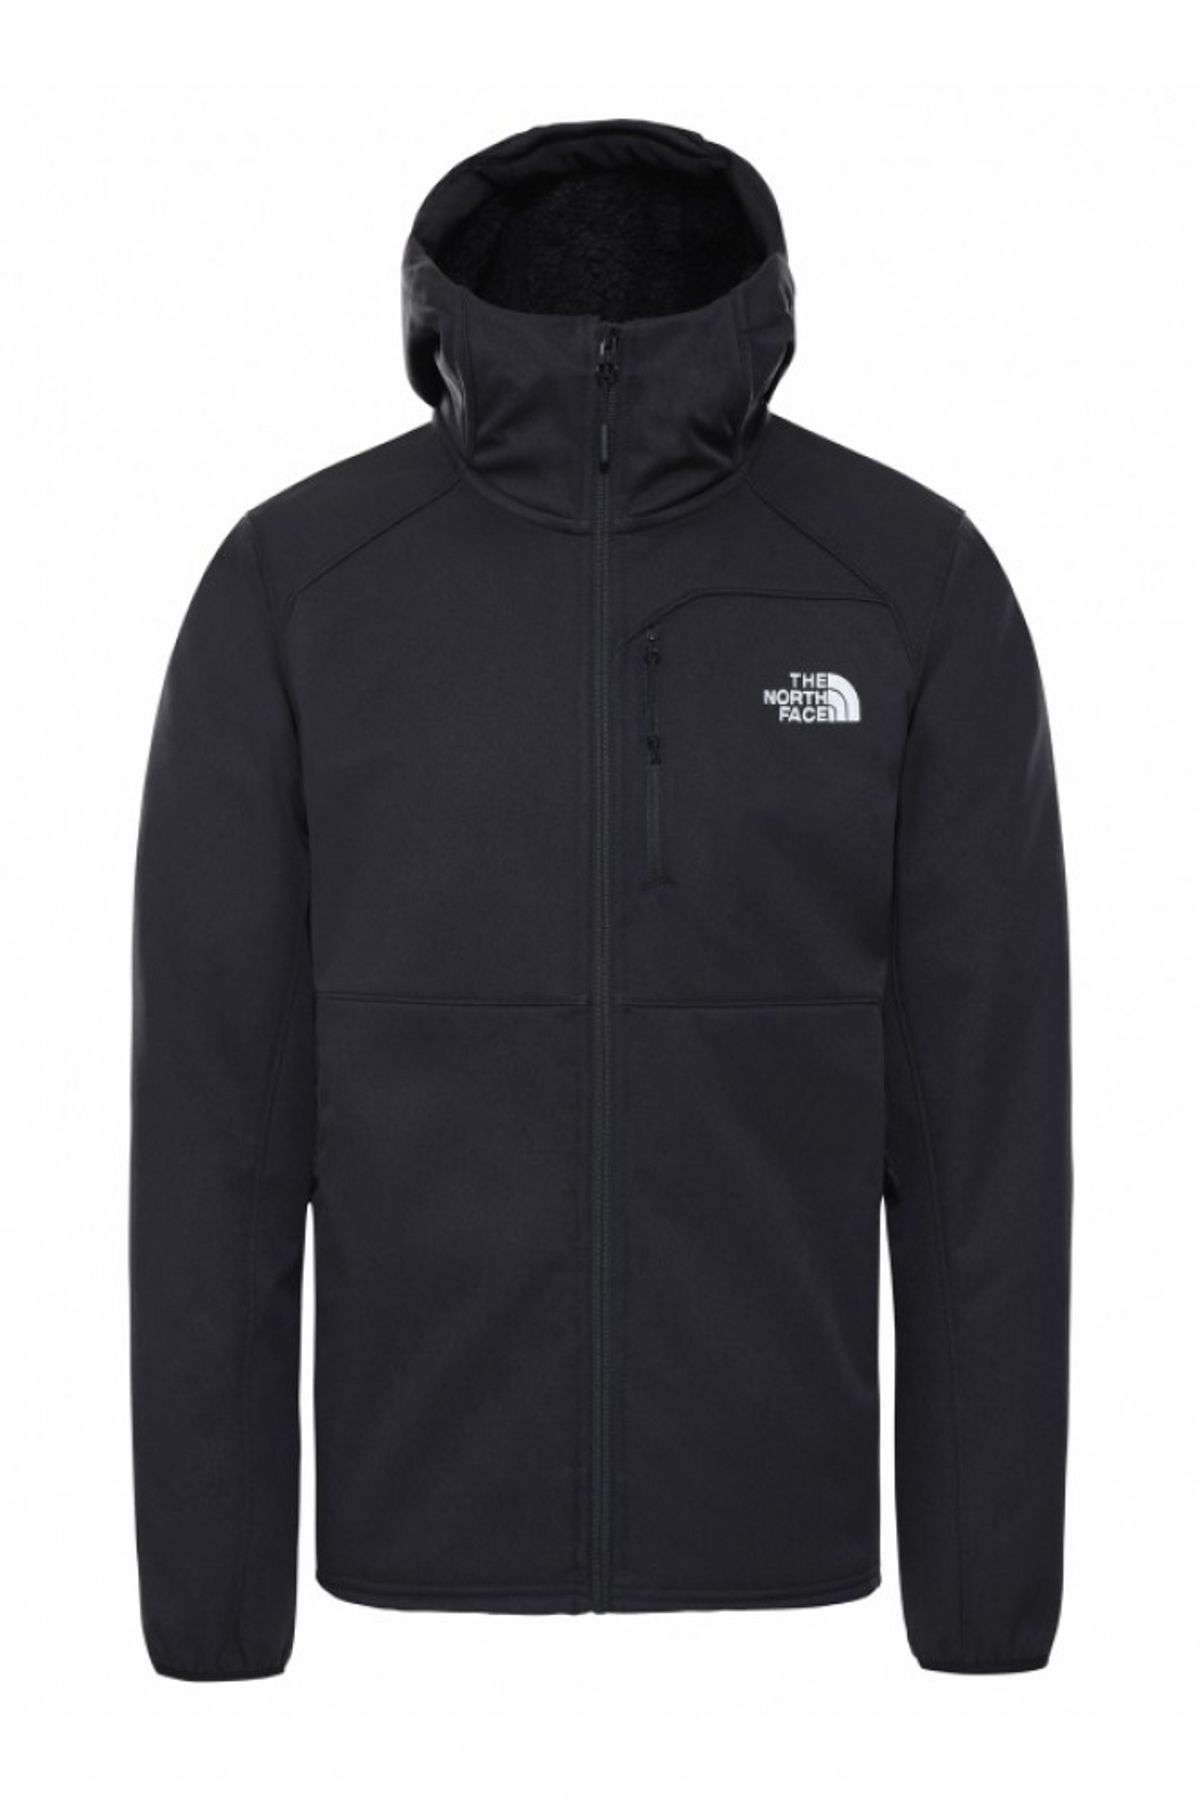 The North Face M Quest Hd Softshell Jacket